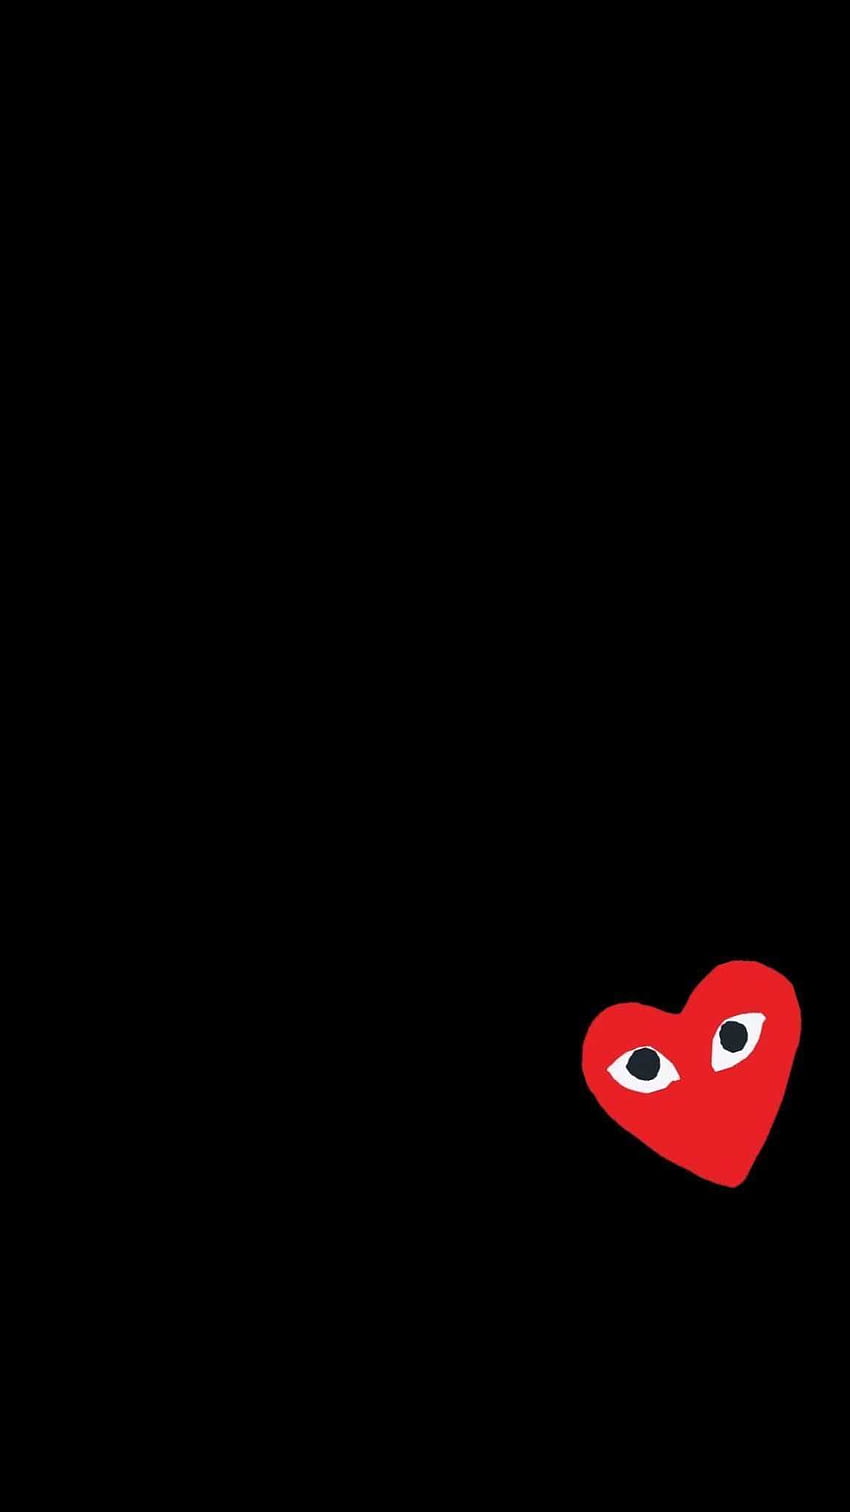 Heart With Eyes Wallpaper - NawPic